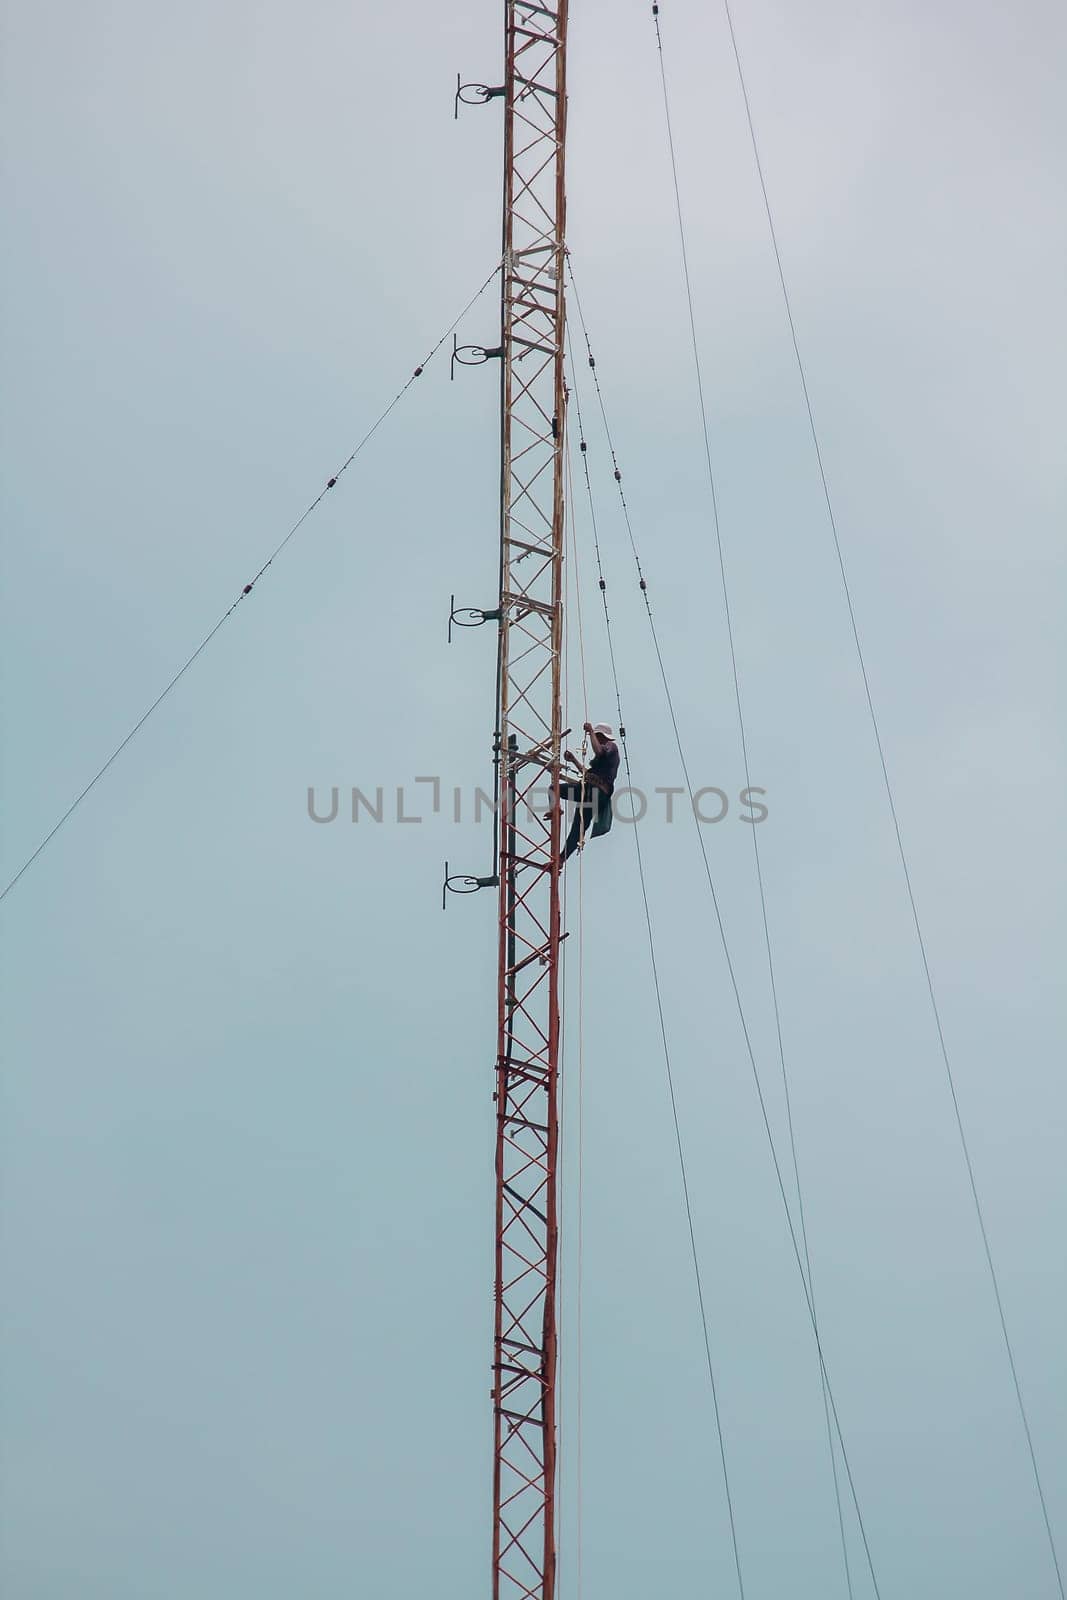 Men are climbing on the antenna. To install the device